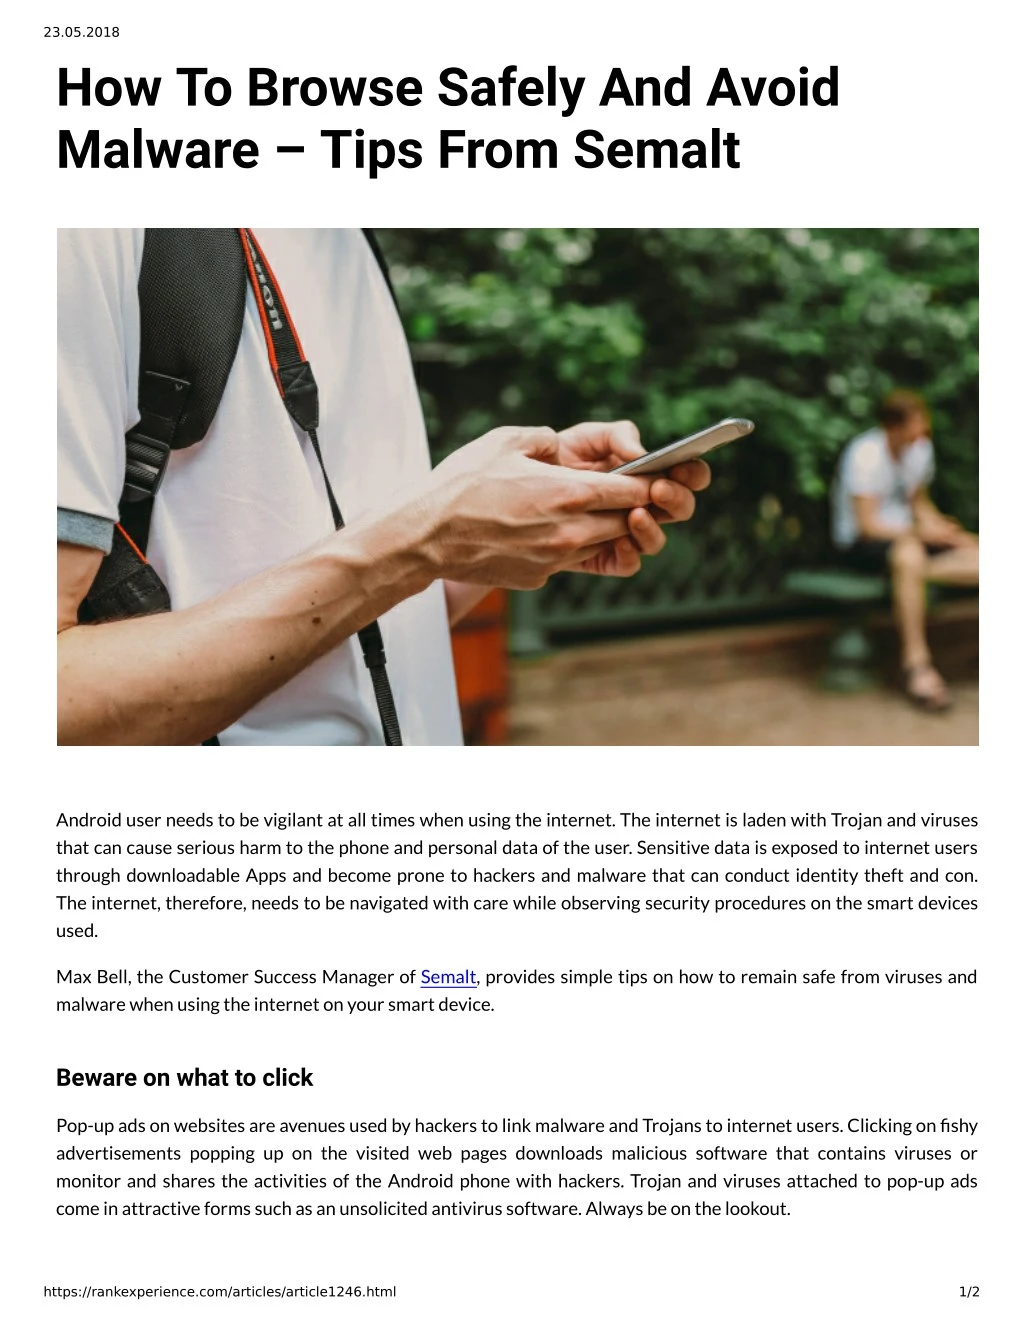 23 05 2018 how to browse safely and avoid malware